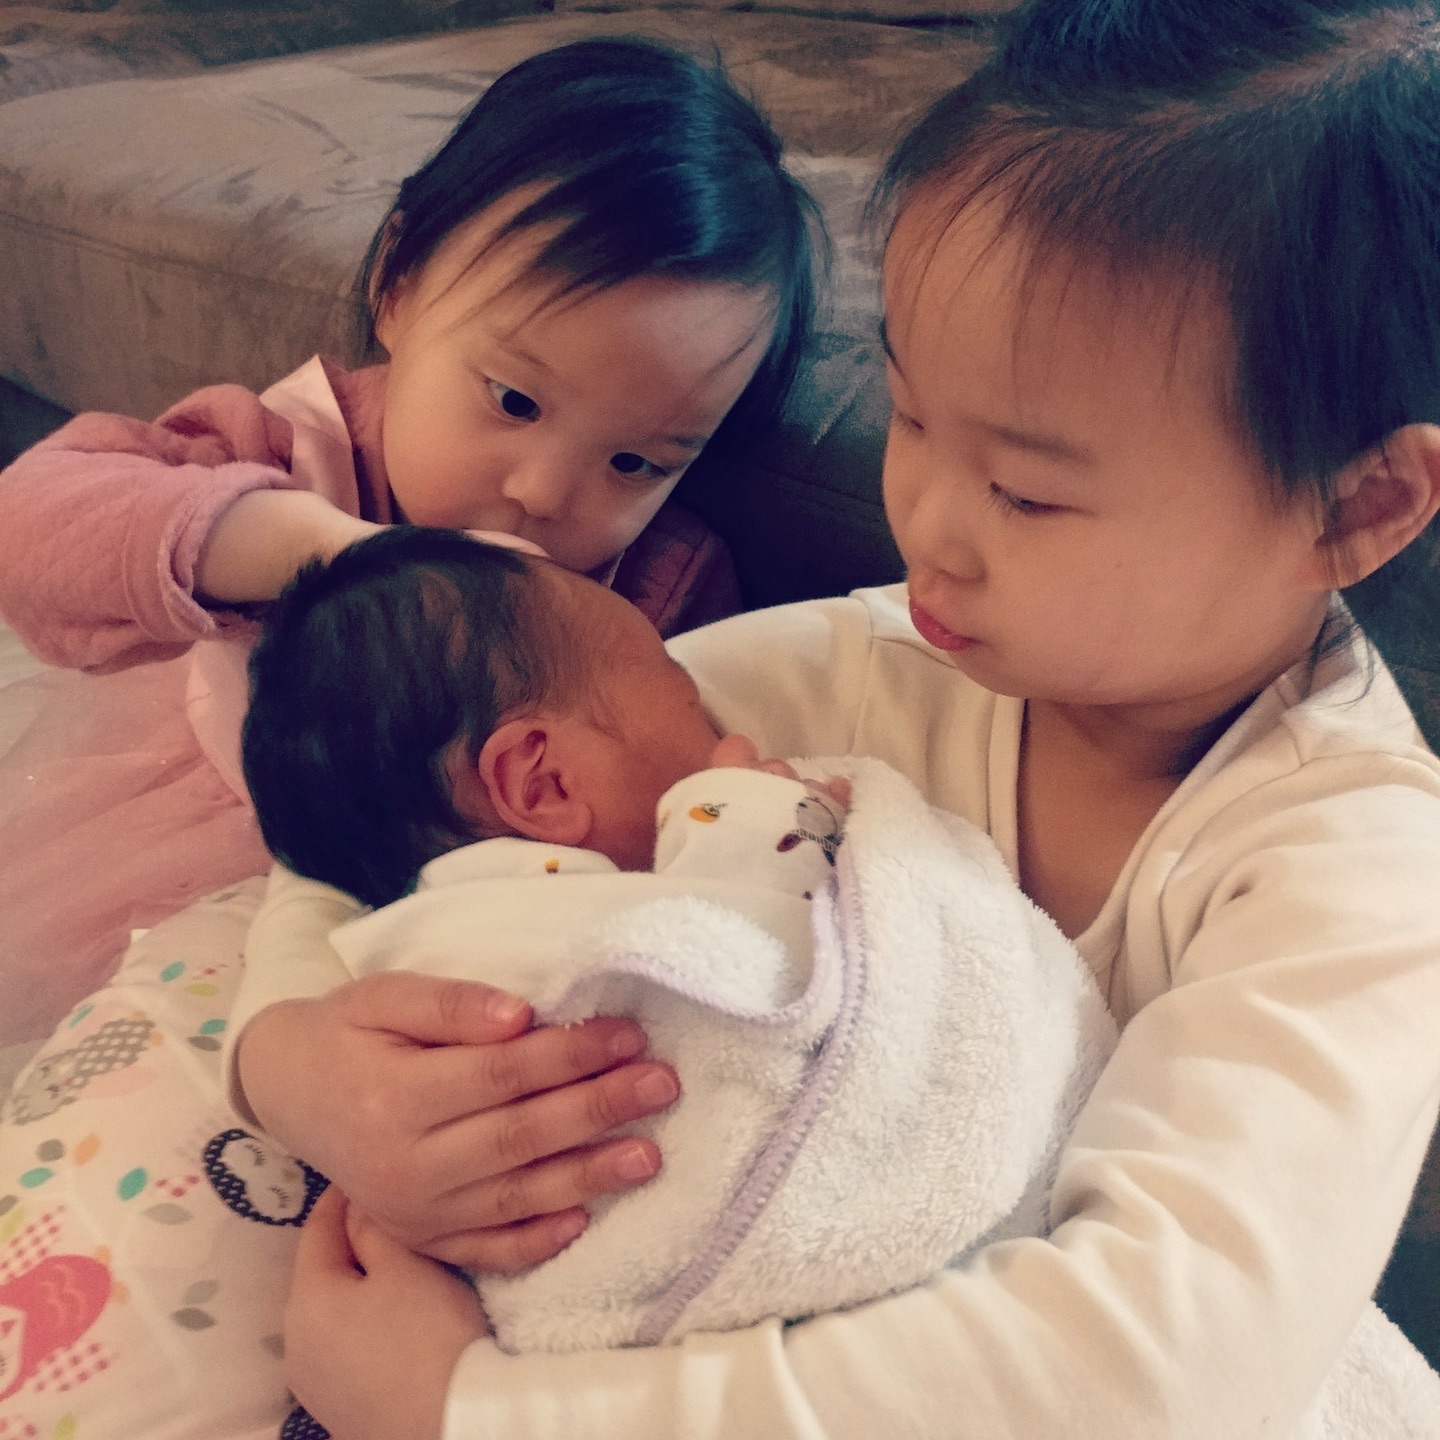 Sunye Reveals What She'll Do If Her Daughter Wants to Pursue an